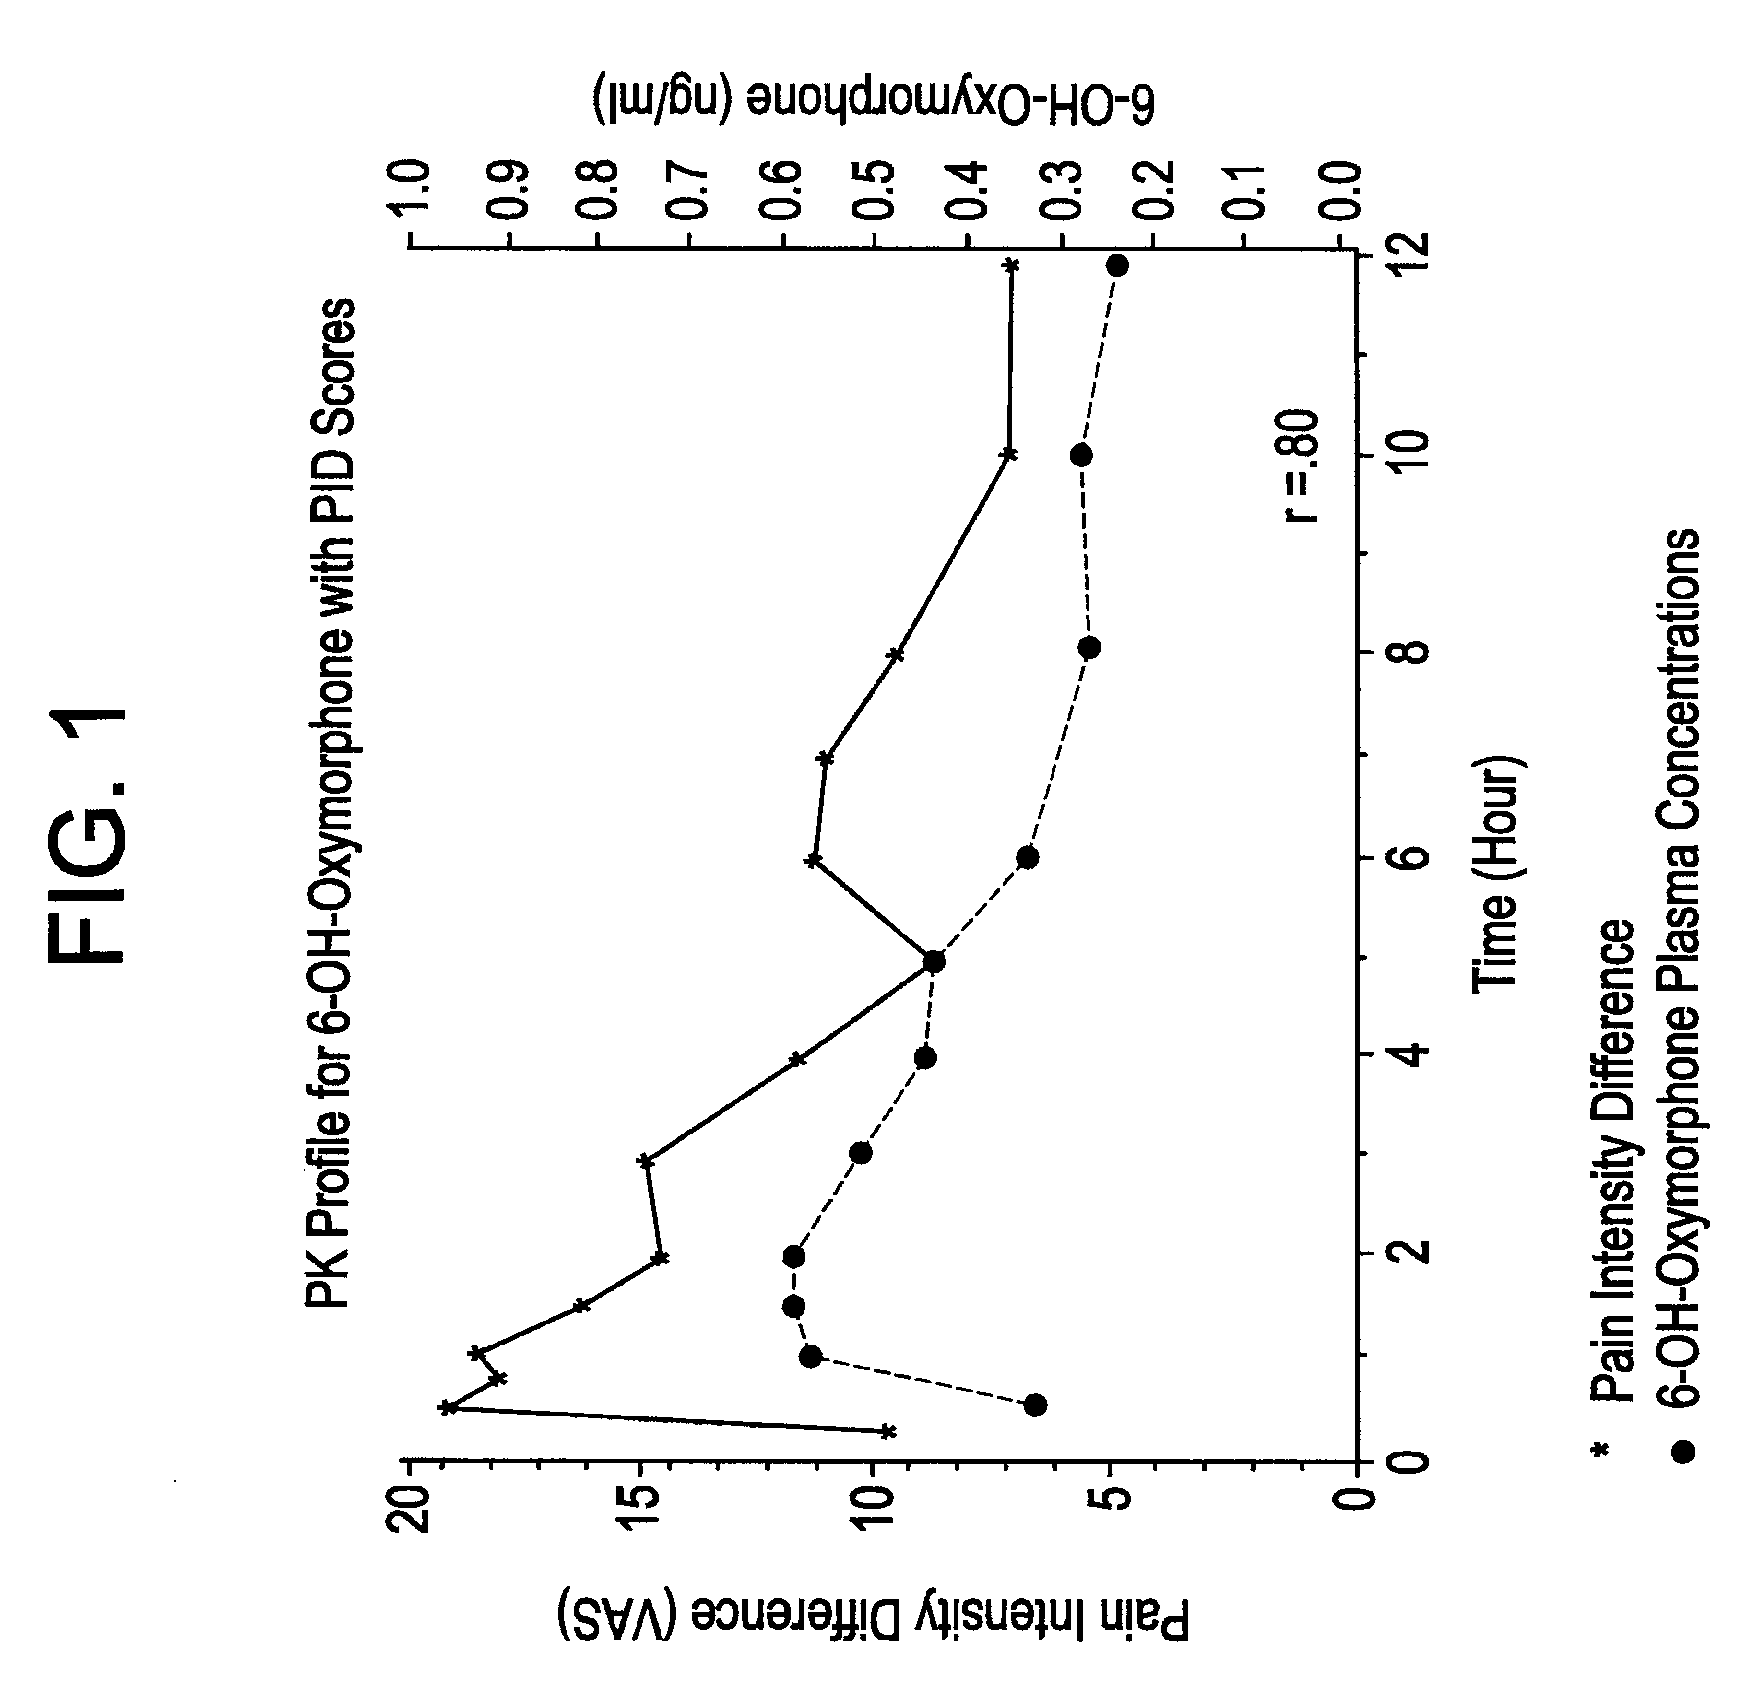 Method of Treating Pain Utilizing Controlled Release Oxymorphone Pharmaceutical Compositions and Instruction on Dosing for Renal Impairment